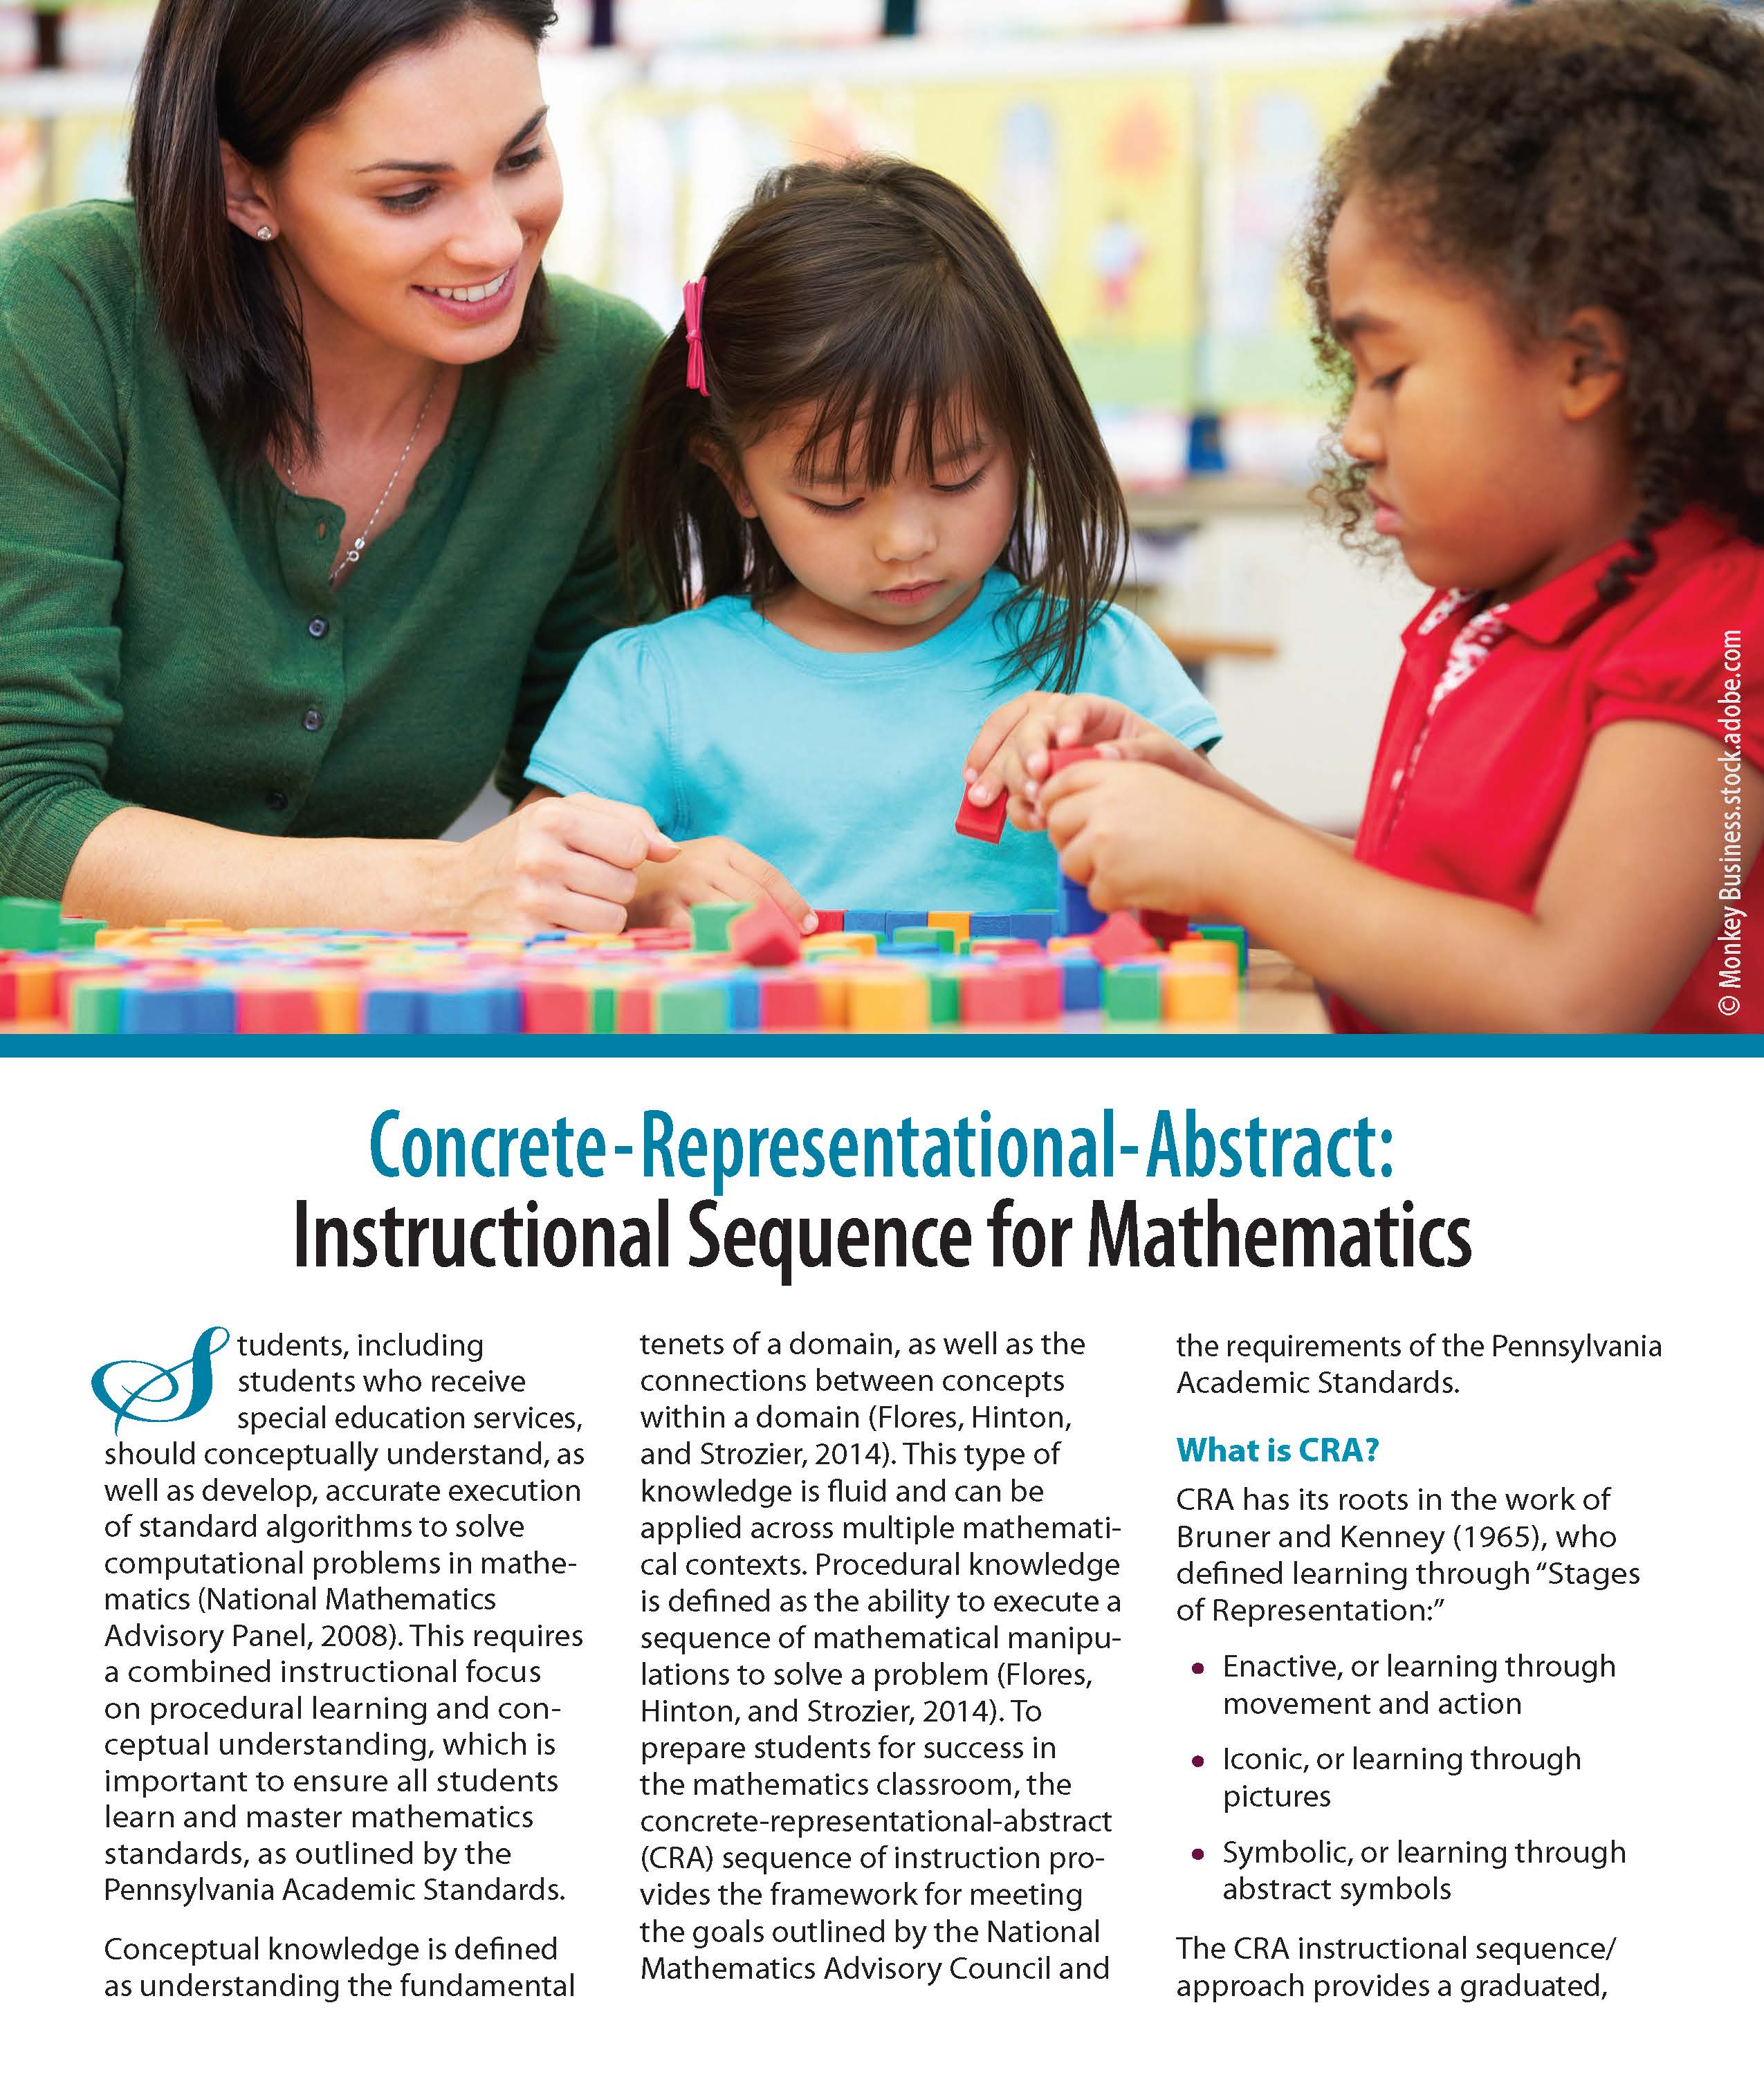 Concrete-Representational-Abstract (CRA): Instructional Sequence for Mathematics